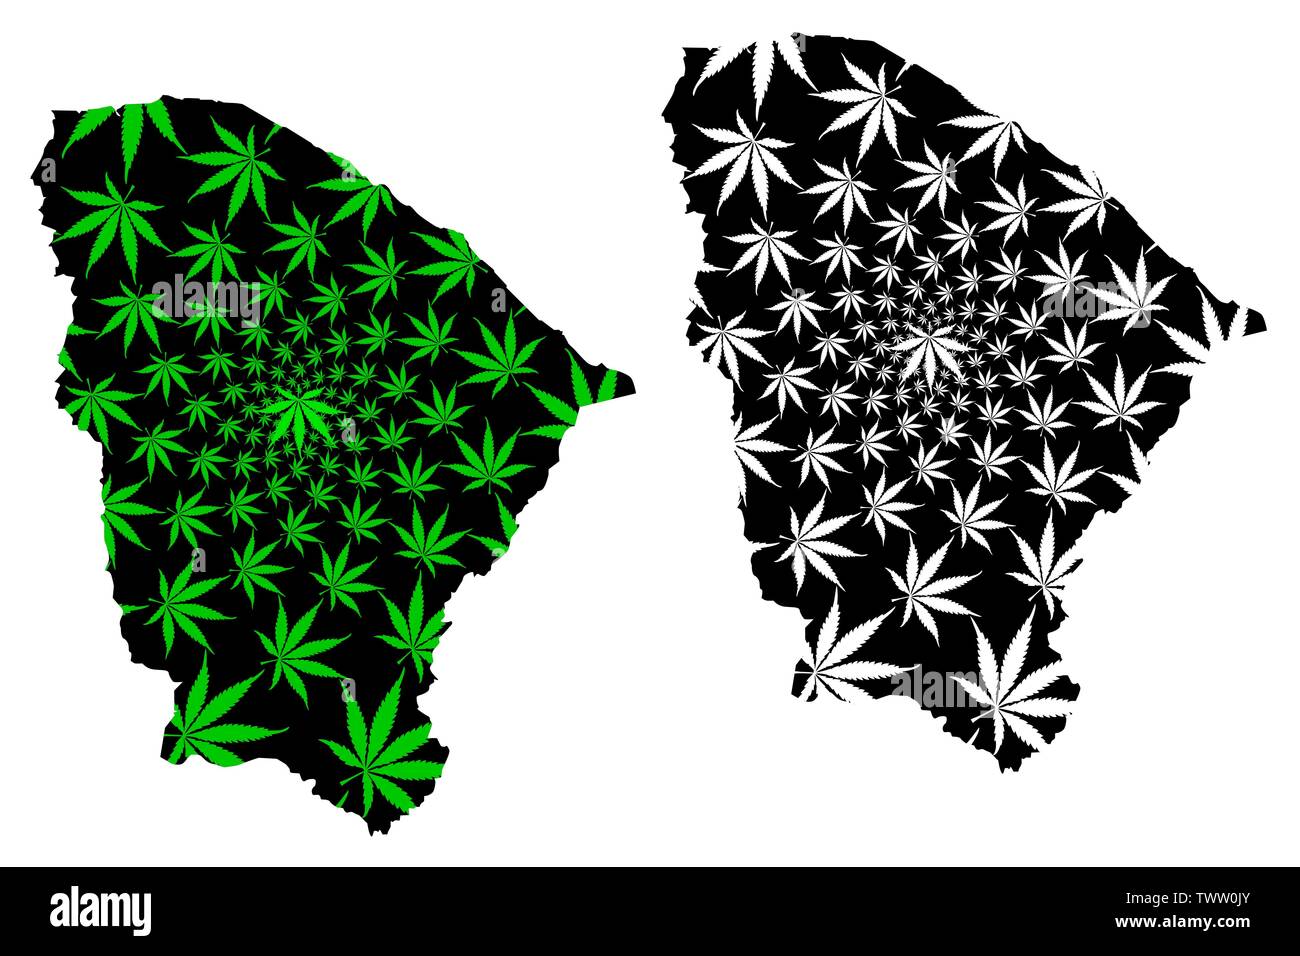 Ceara (Region of Brazil, Federated state, Federative Republic of Brazil) map is designed cannabis leaf green and black, Ceará map made of marijuana (m Stock Vector